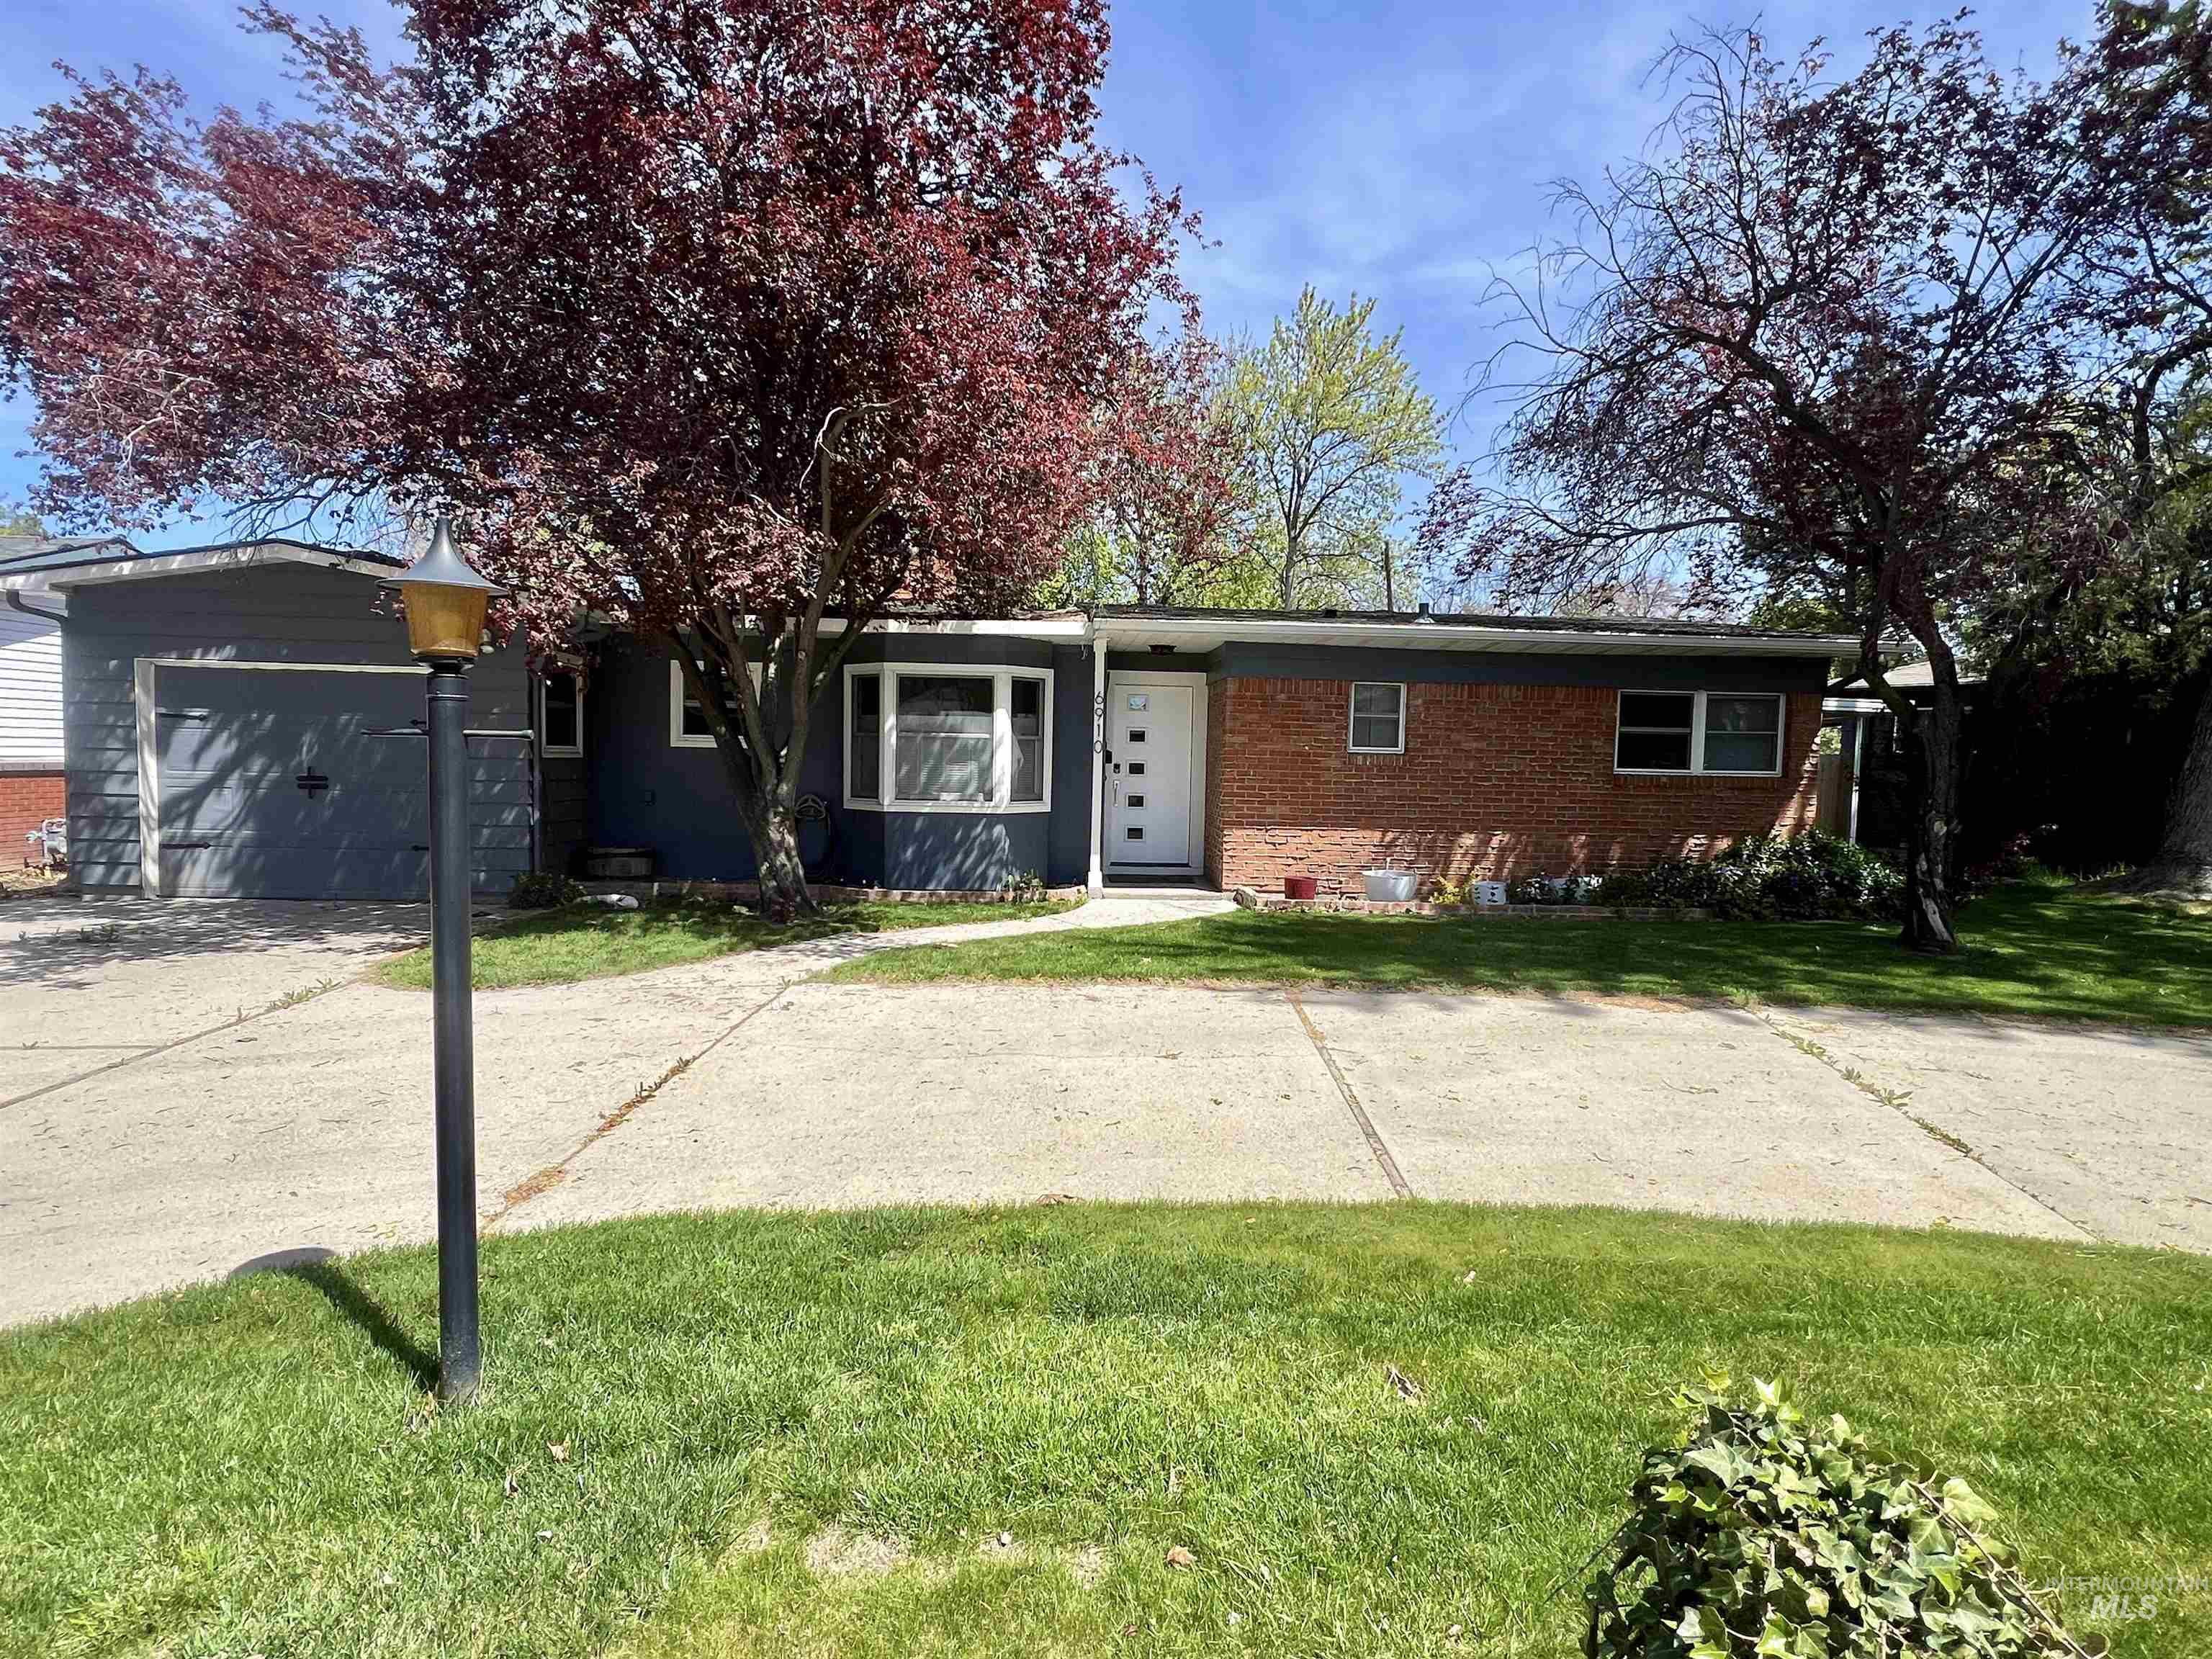 6910 W Holiday Dr., Boise, Idaho 83709, 3 Bedrooms, 1 Bathroom, Rental For Rent, Price $2,000,MLS 98907865